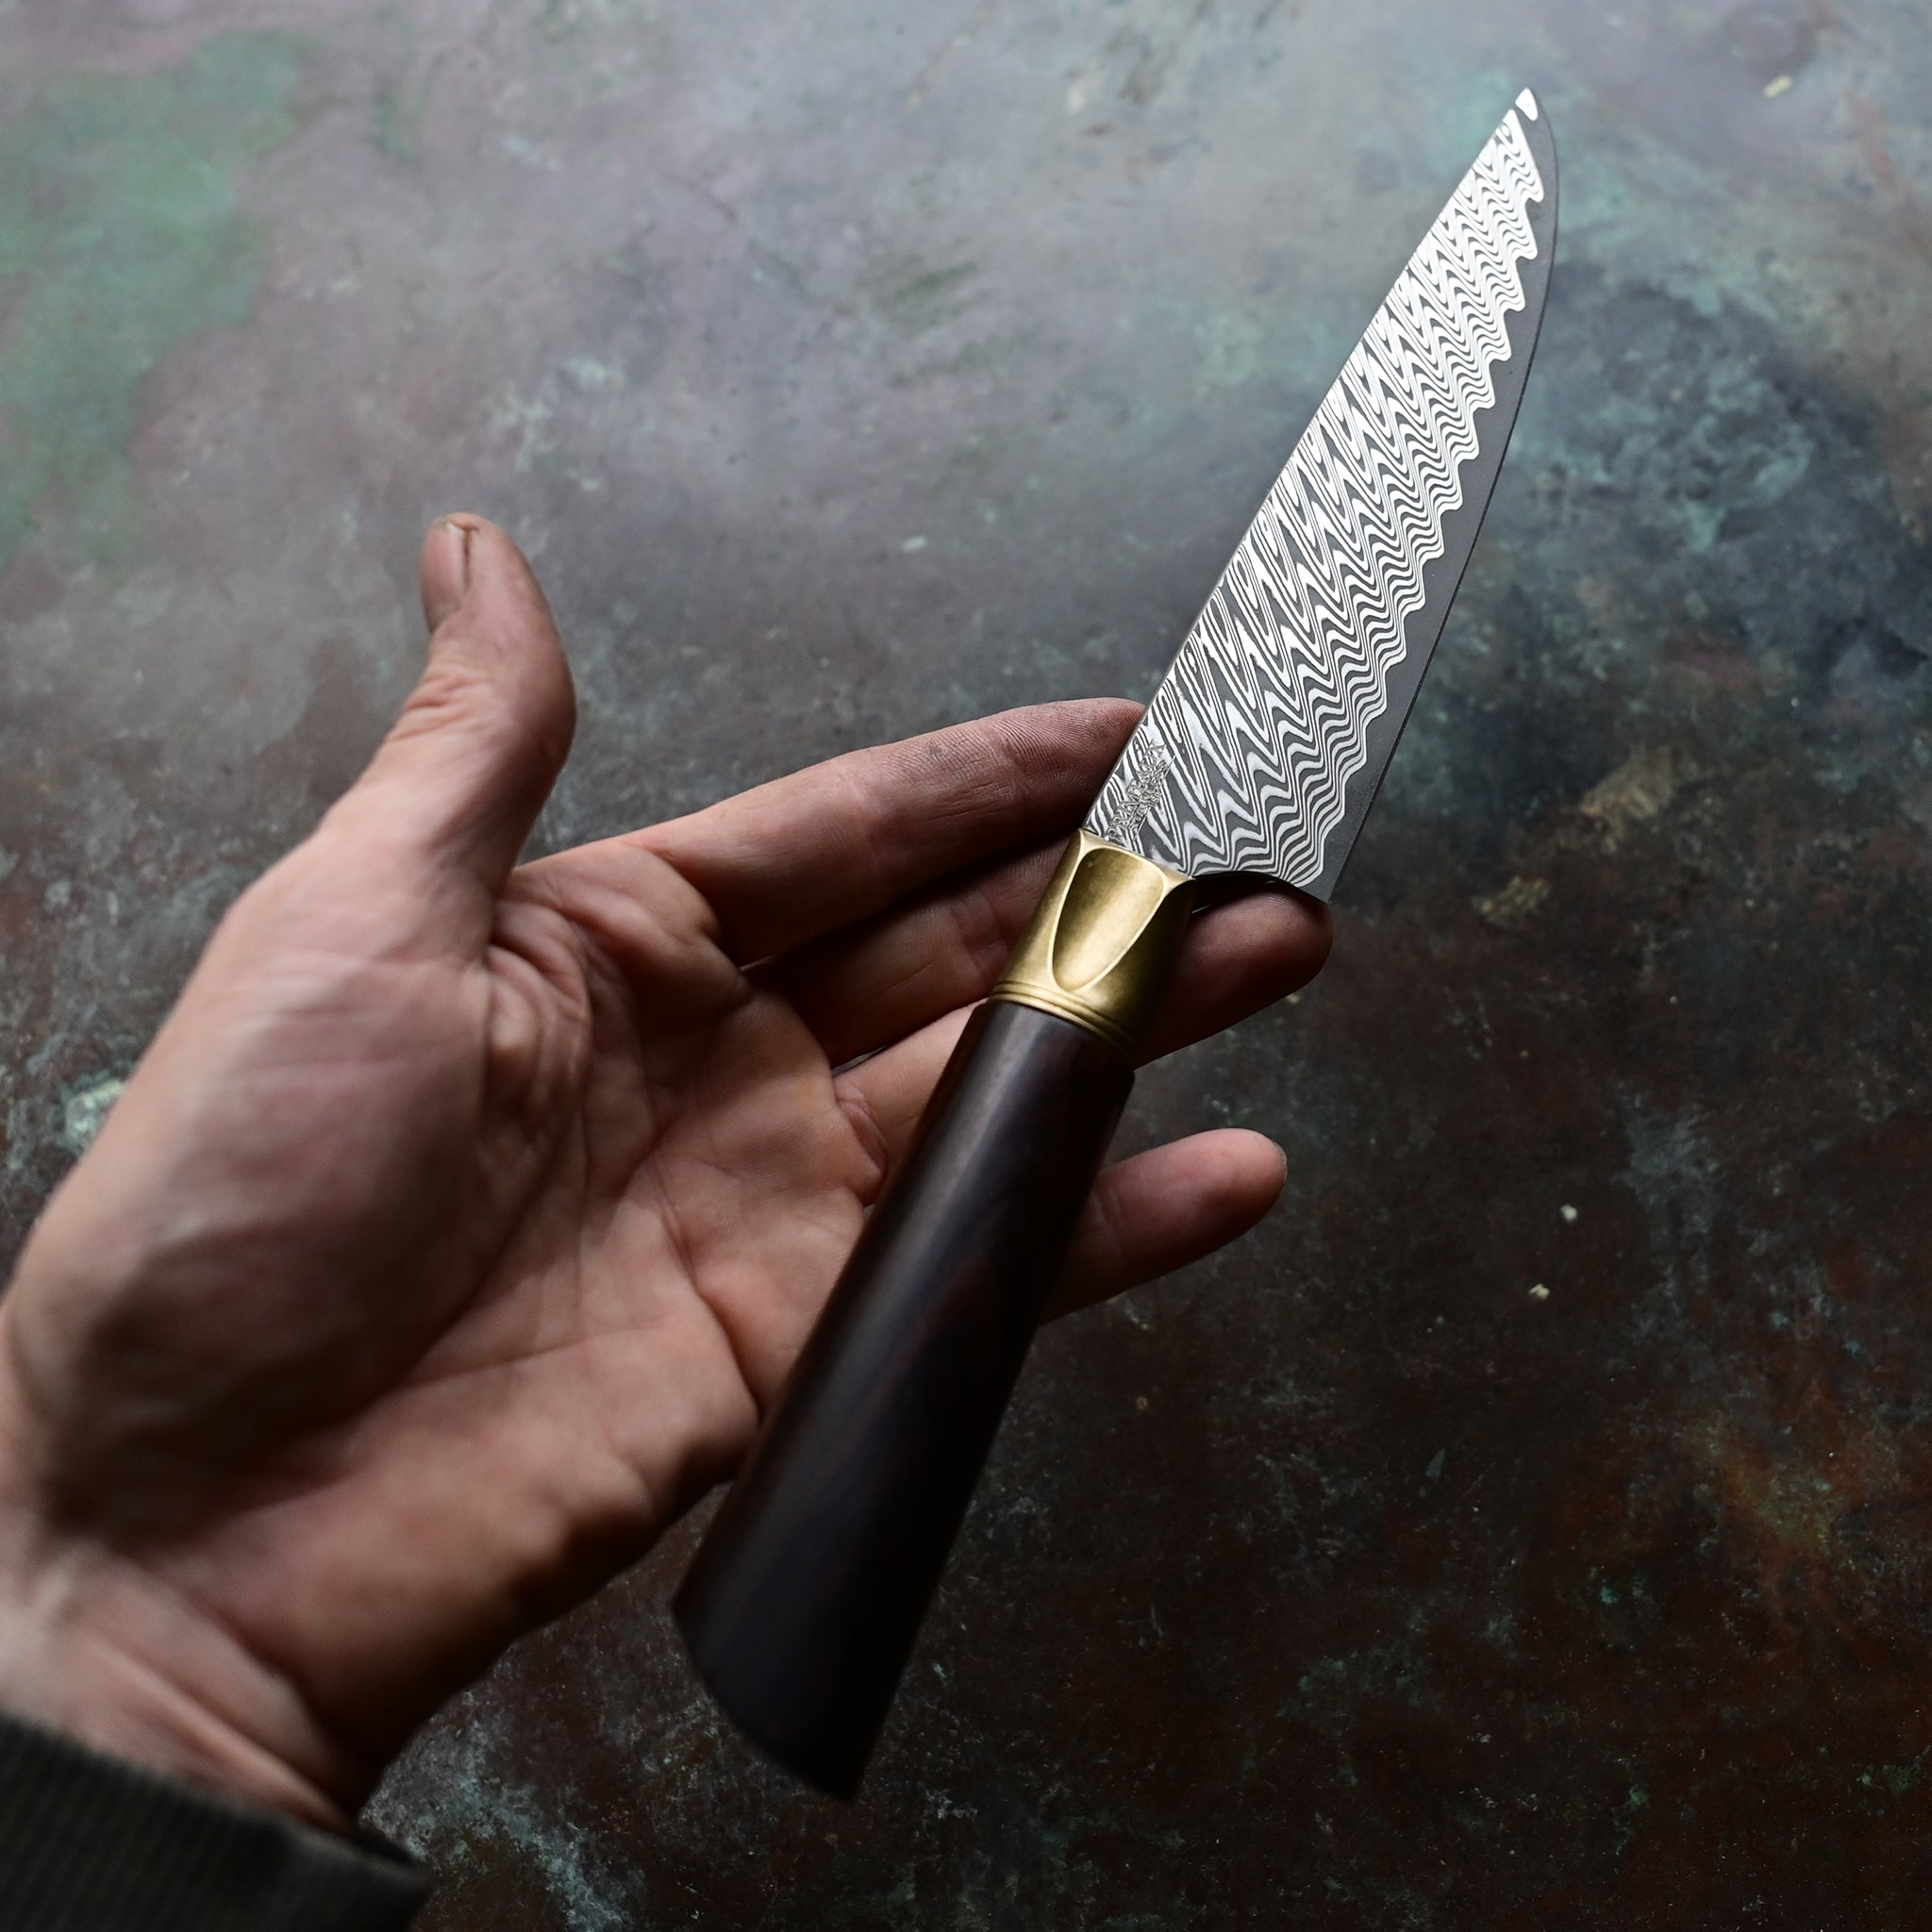 A one-of-a-kind 6.5" Meridian petty knife with a sawtooth Damascus blade, natural bronze bolster, and a straight-grained Turkish walnut handle in rich brown tones, hand-forged by John Phillips